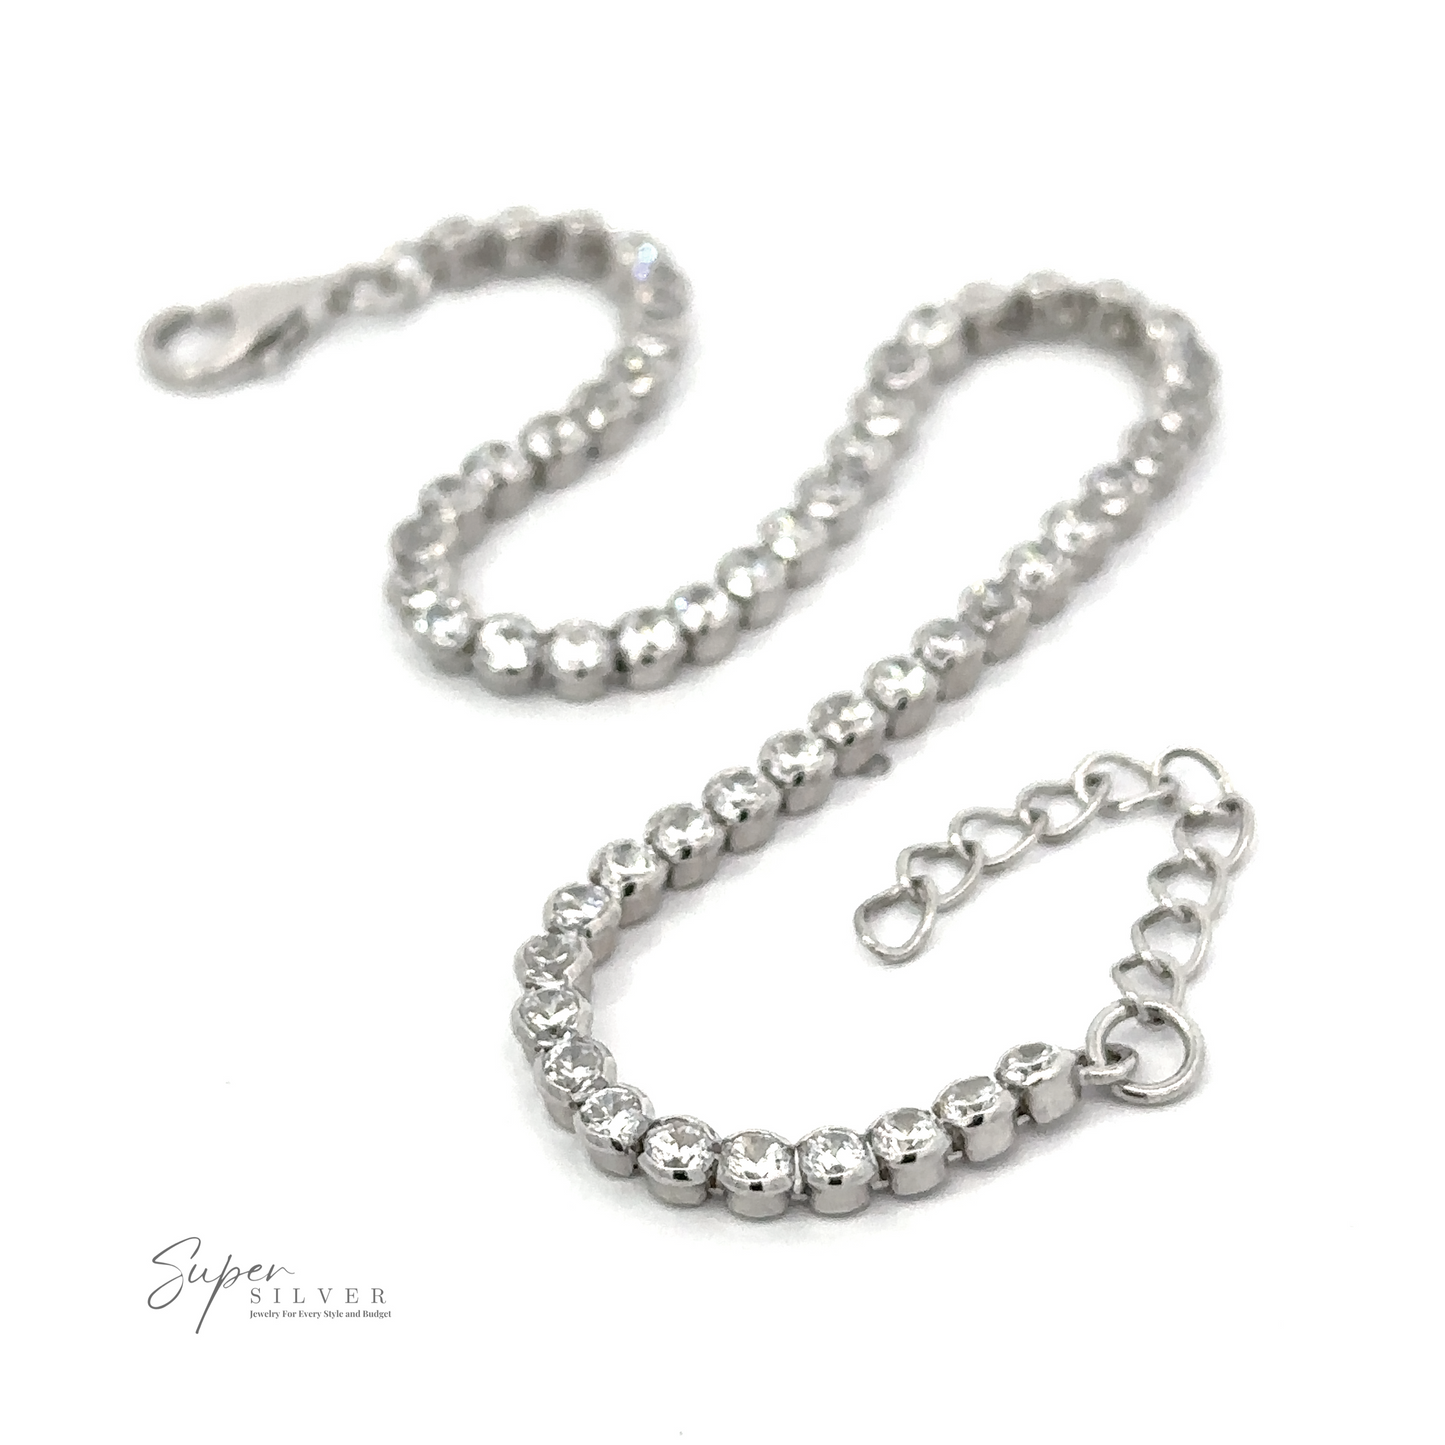 A Round Cubic Zirconia Tennis Bracelet with a clasp, featuring a series of linked, round beads and laid out flat on a white background. The logo "Super Silver" is visible in the bottom left corner. This dainty accessory adds an elegant touch to any outfit.